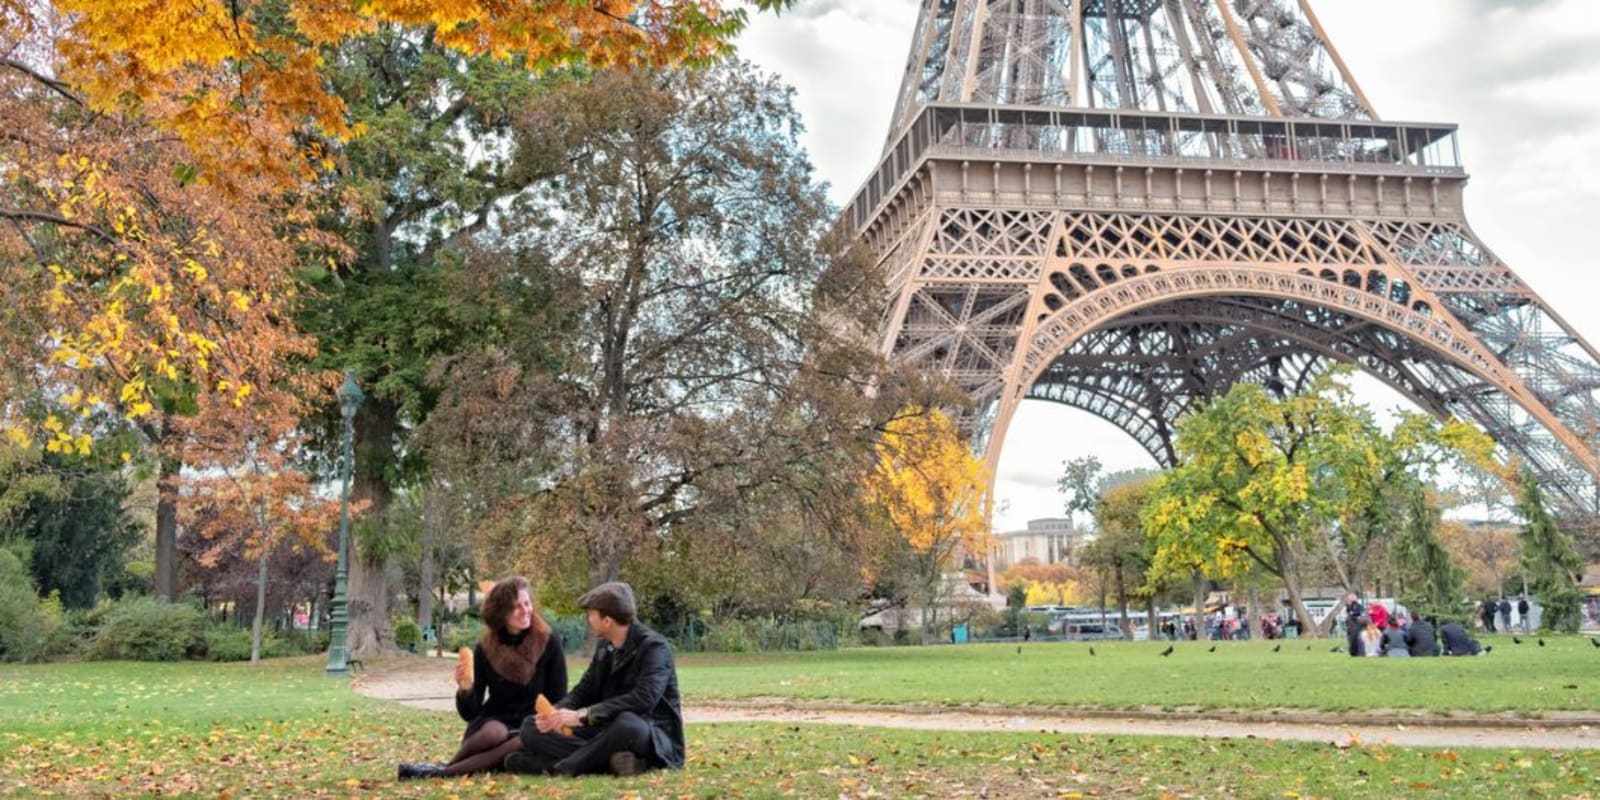 A couple sitting on the grass in front of the Eiffel tower eating a Baguette